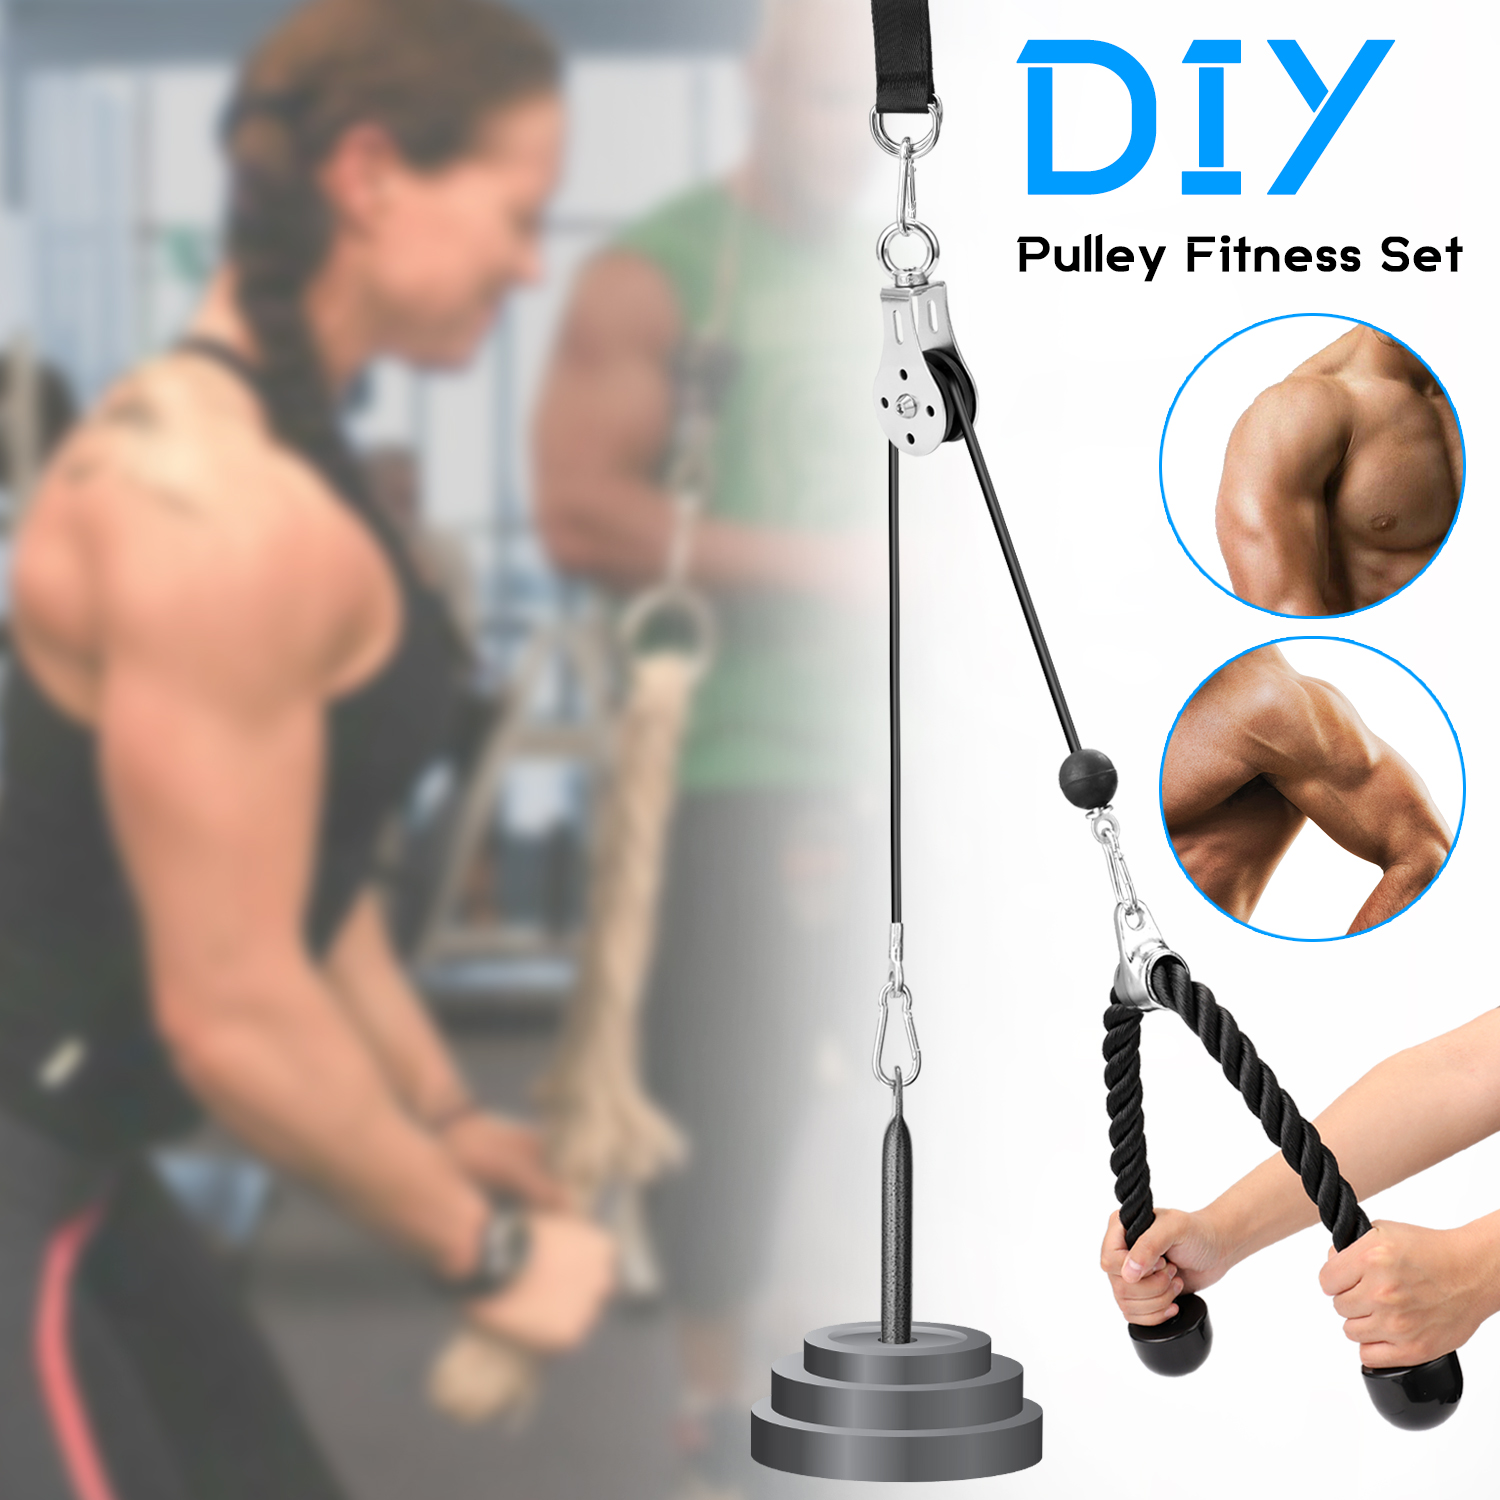 Pulley Curl Bar System Lat Olympic Blaster Cable Weights-LAT Pulley System Arm Muscle Strength Training Exerciser Fitness Equipment For Men Women